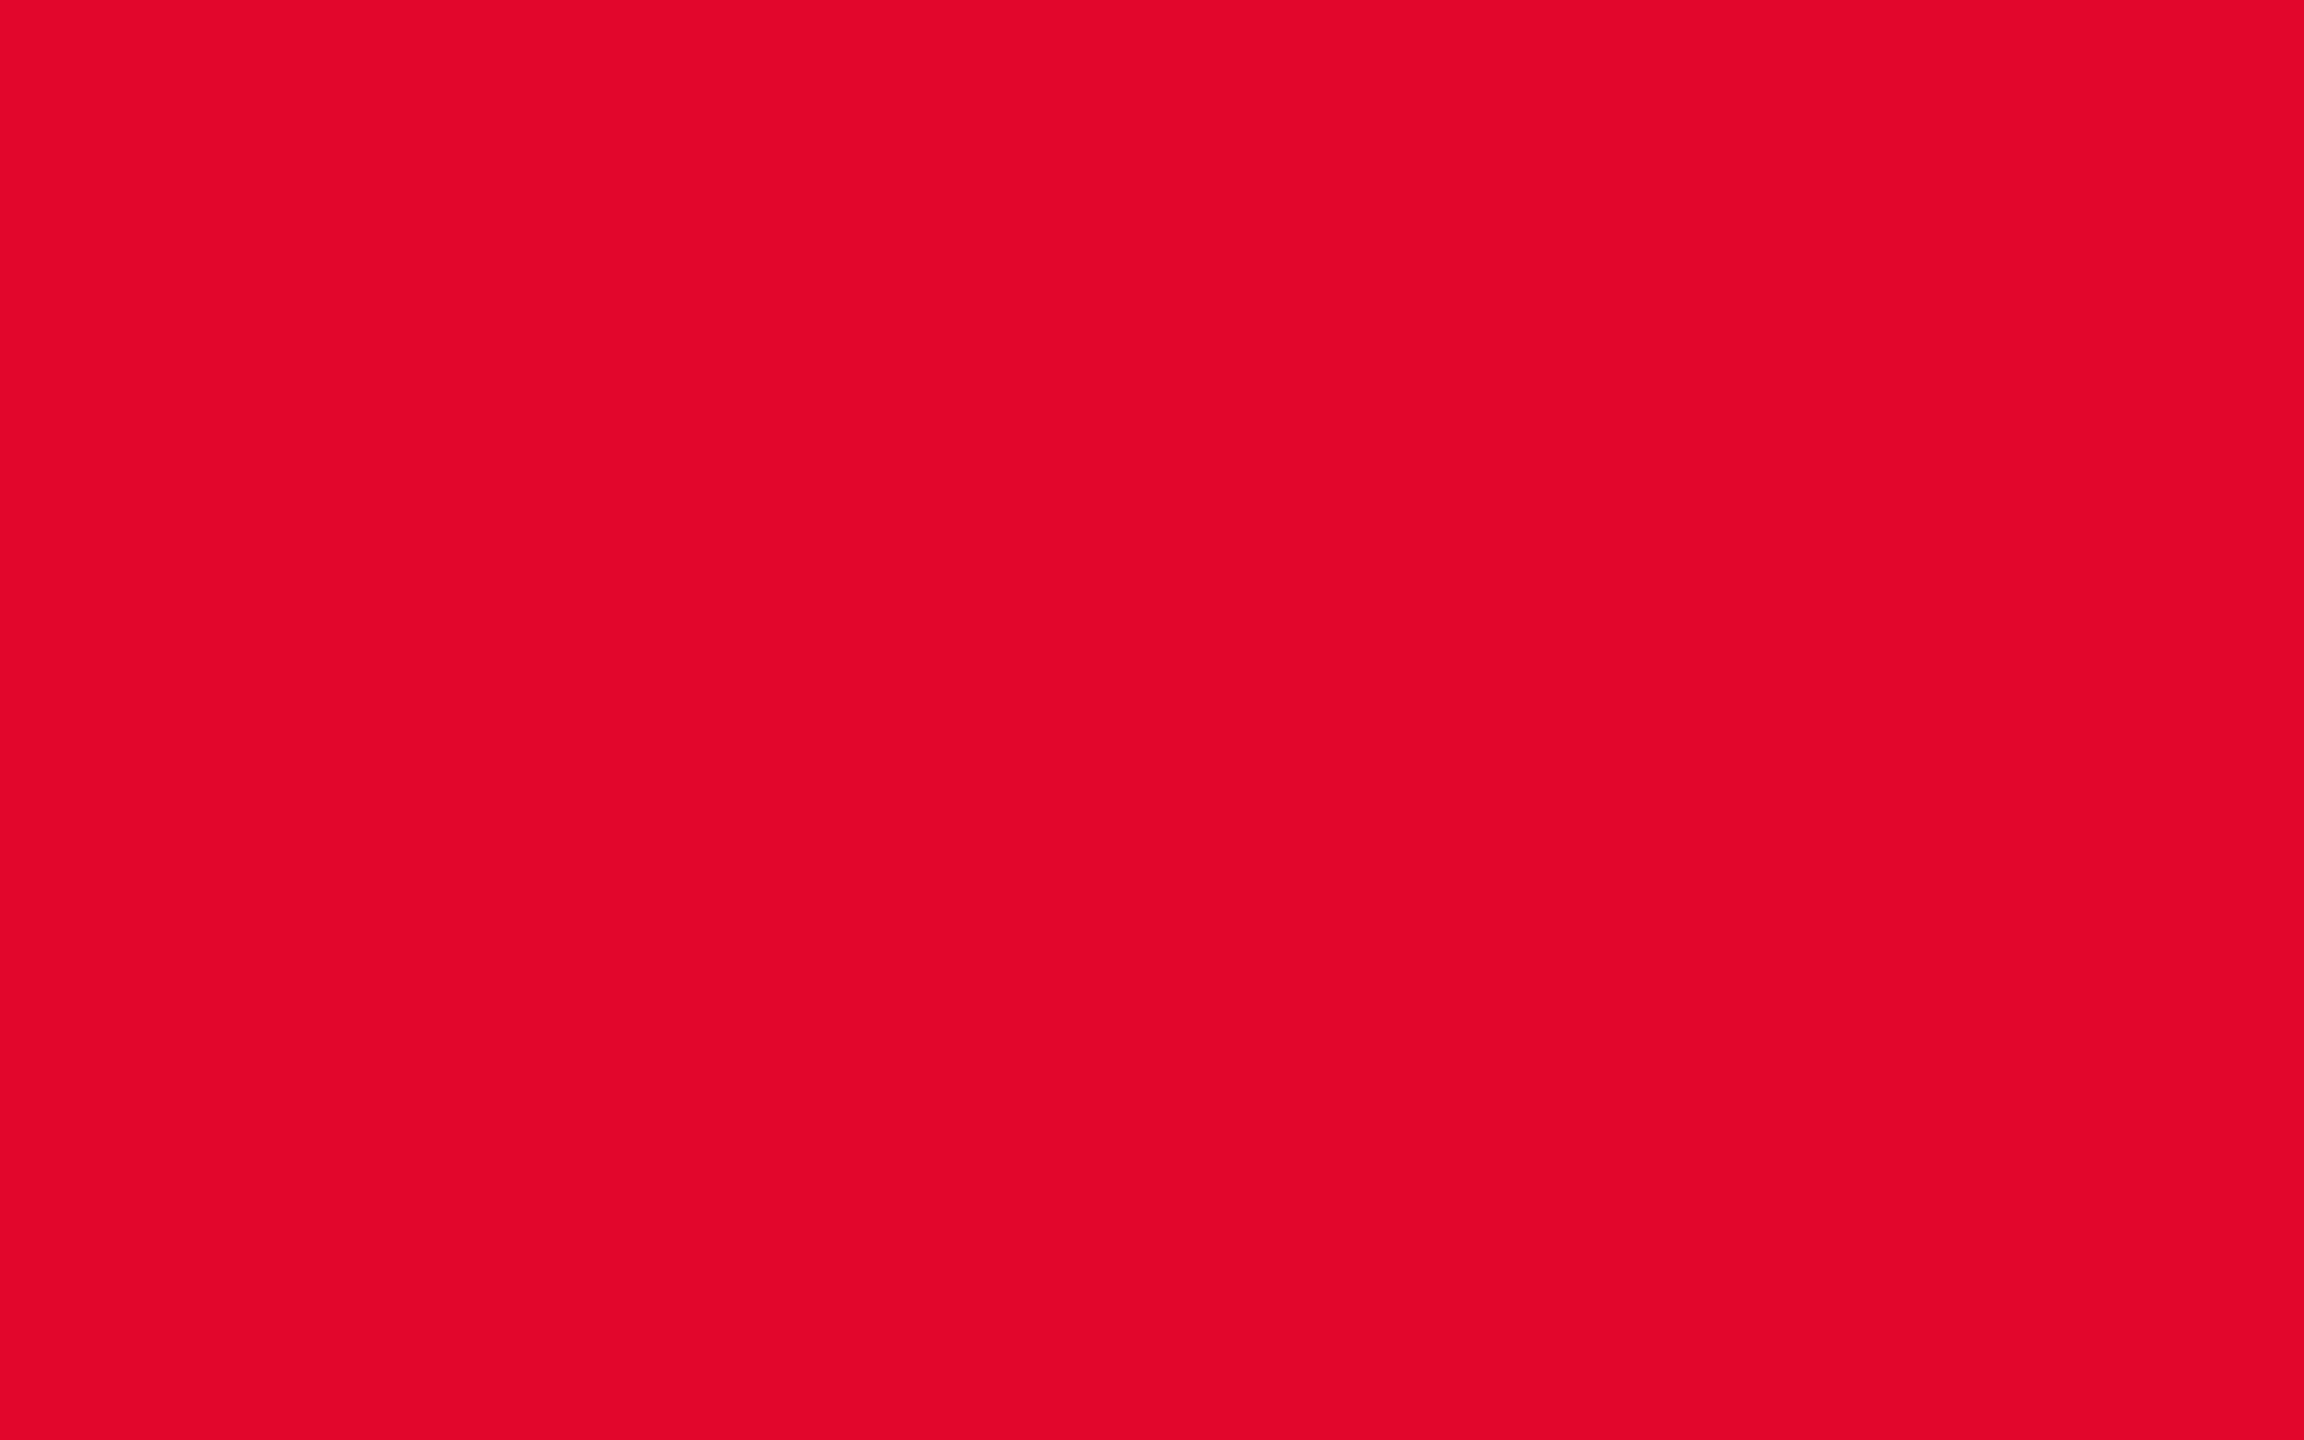 2304x1440 Medium Candy Apple Red Solid Color Background